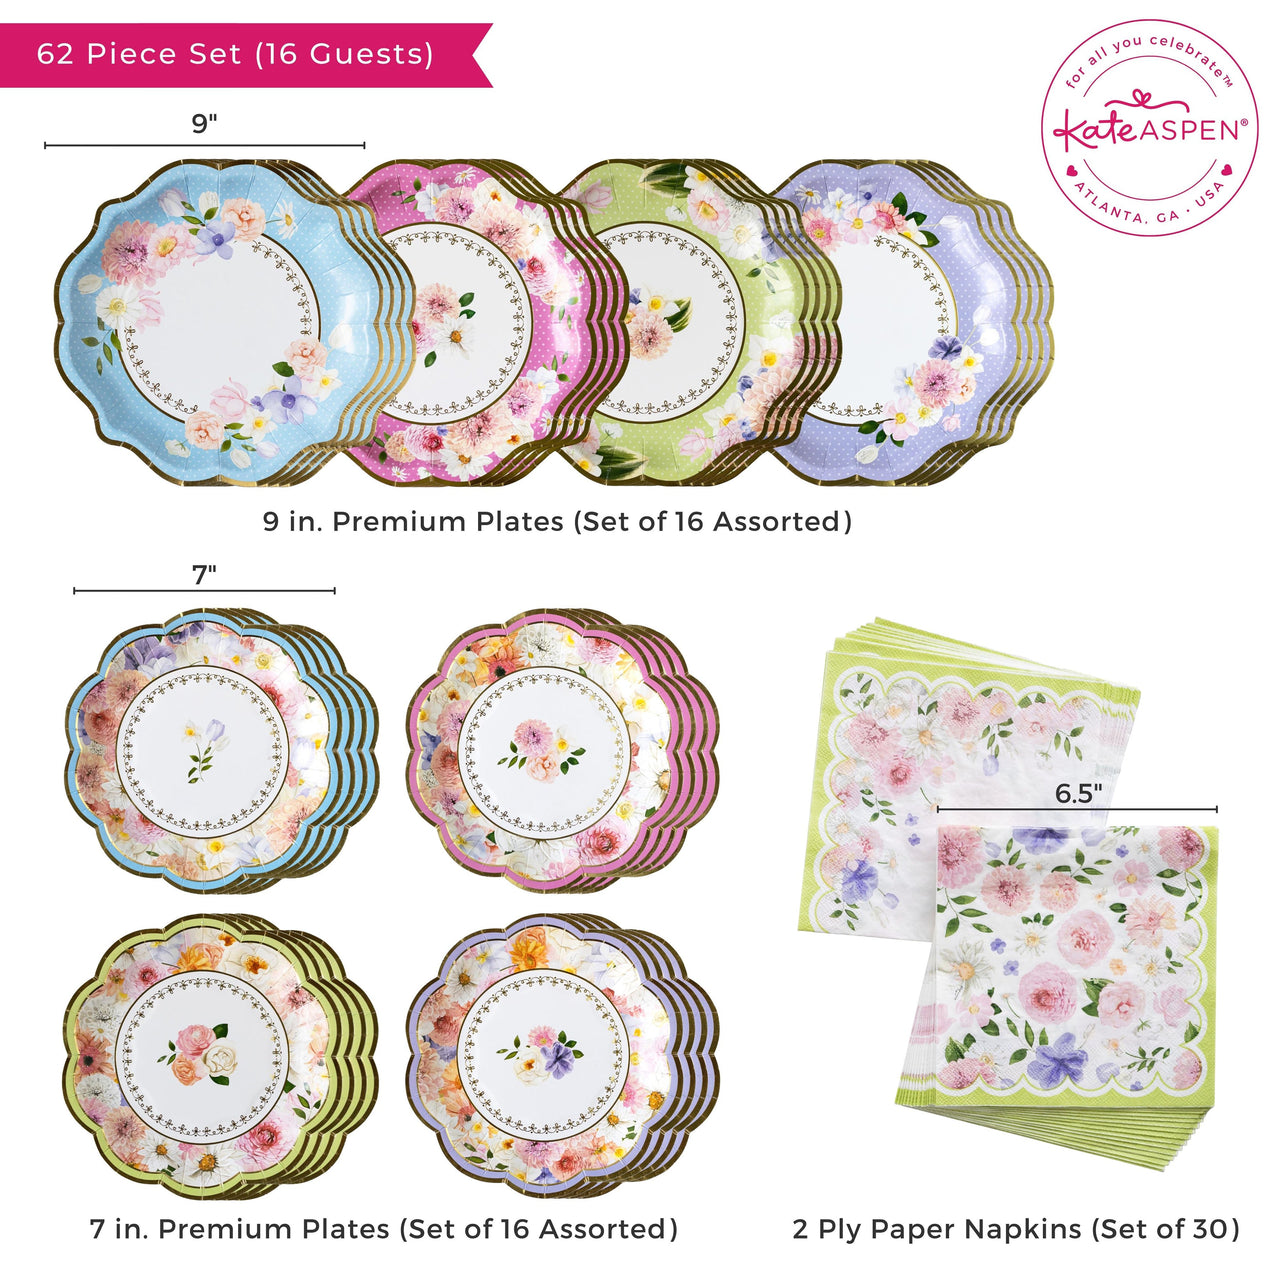 Tea Time Party 62 Piece Party Tableware Set (16 Guests) - Alternate Image 6 | My Wedding Favors